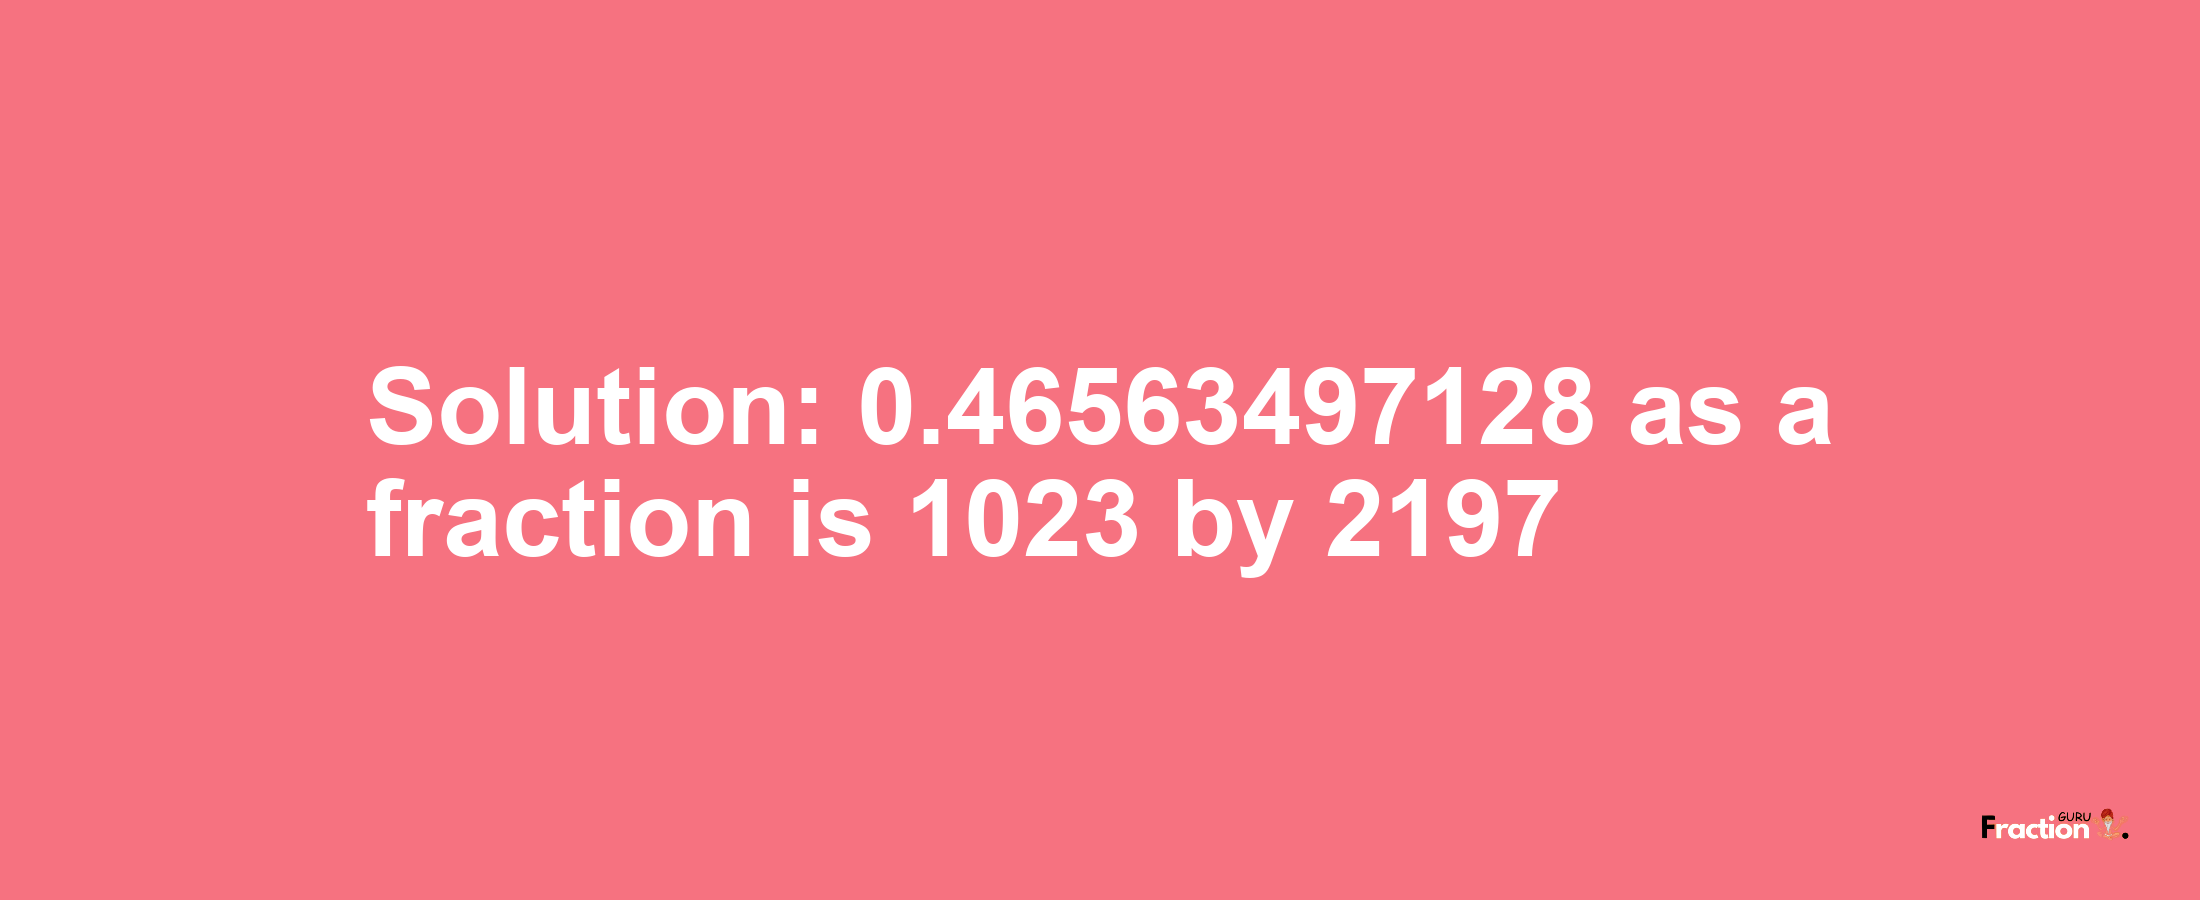 Solution:0.46563497128 as a fraction is 1023/2197